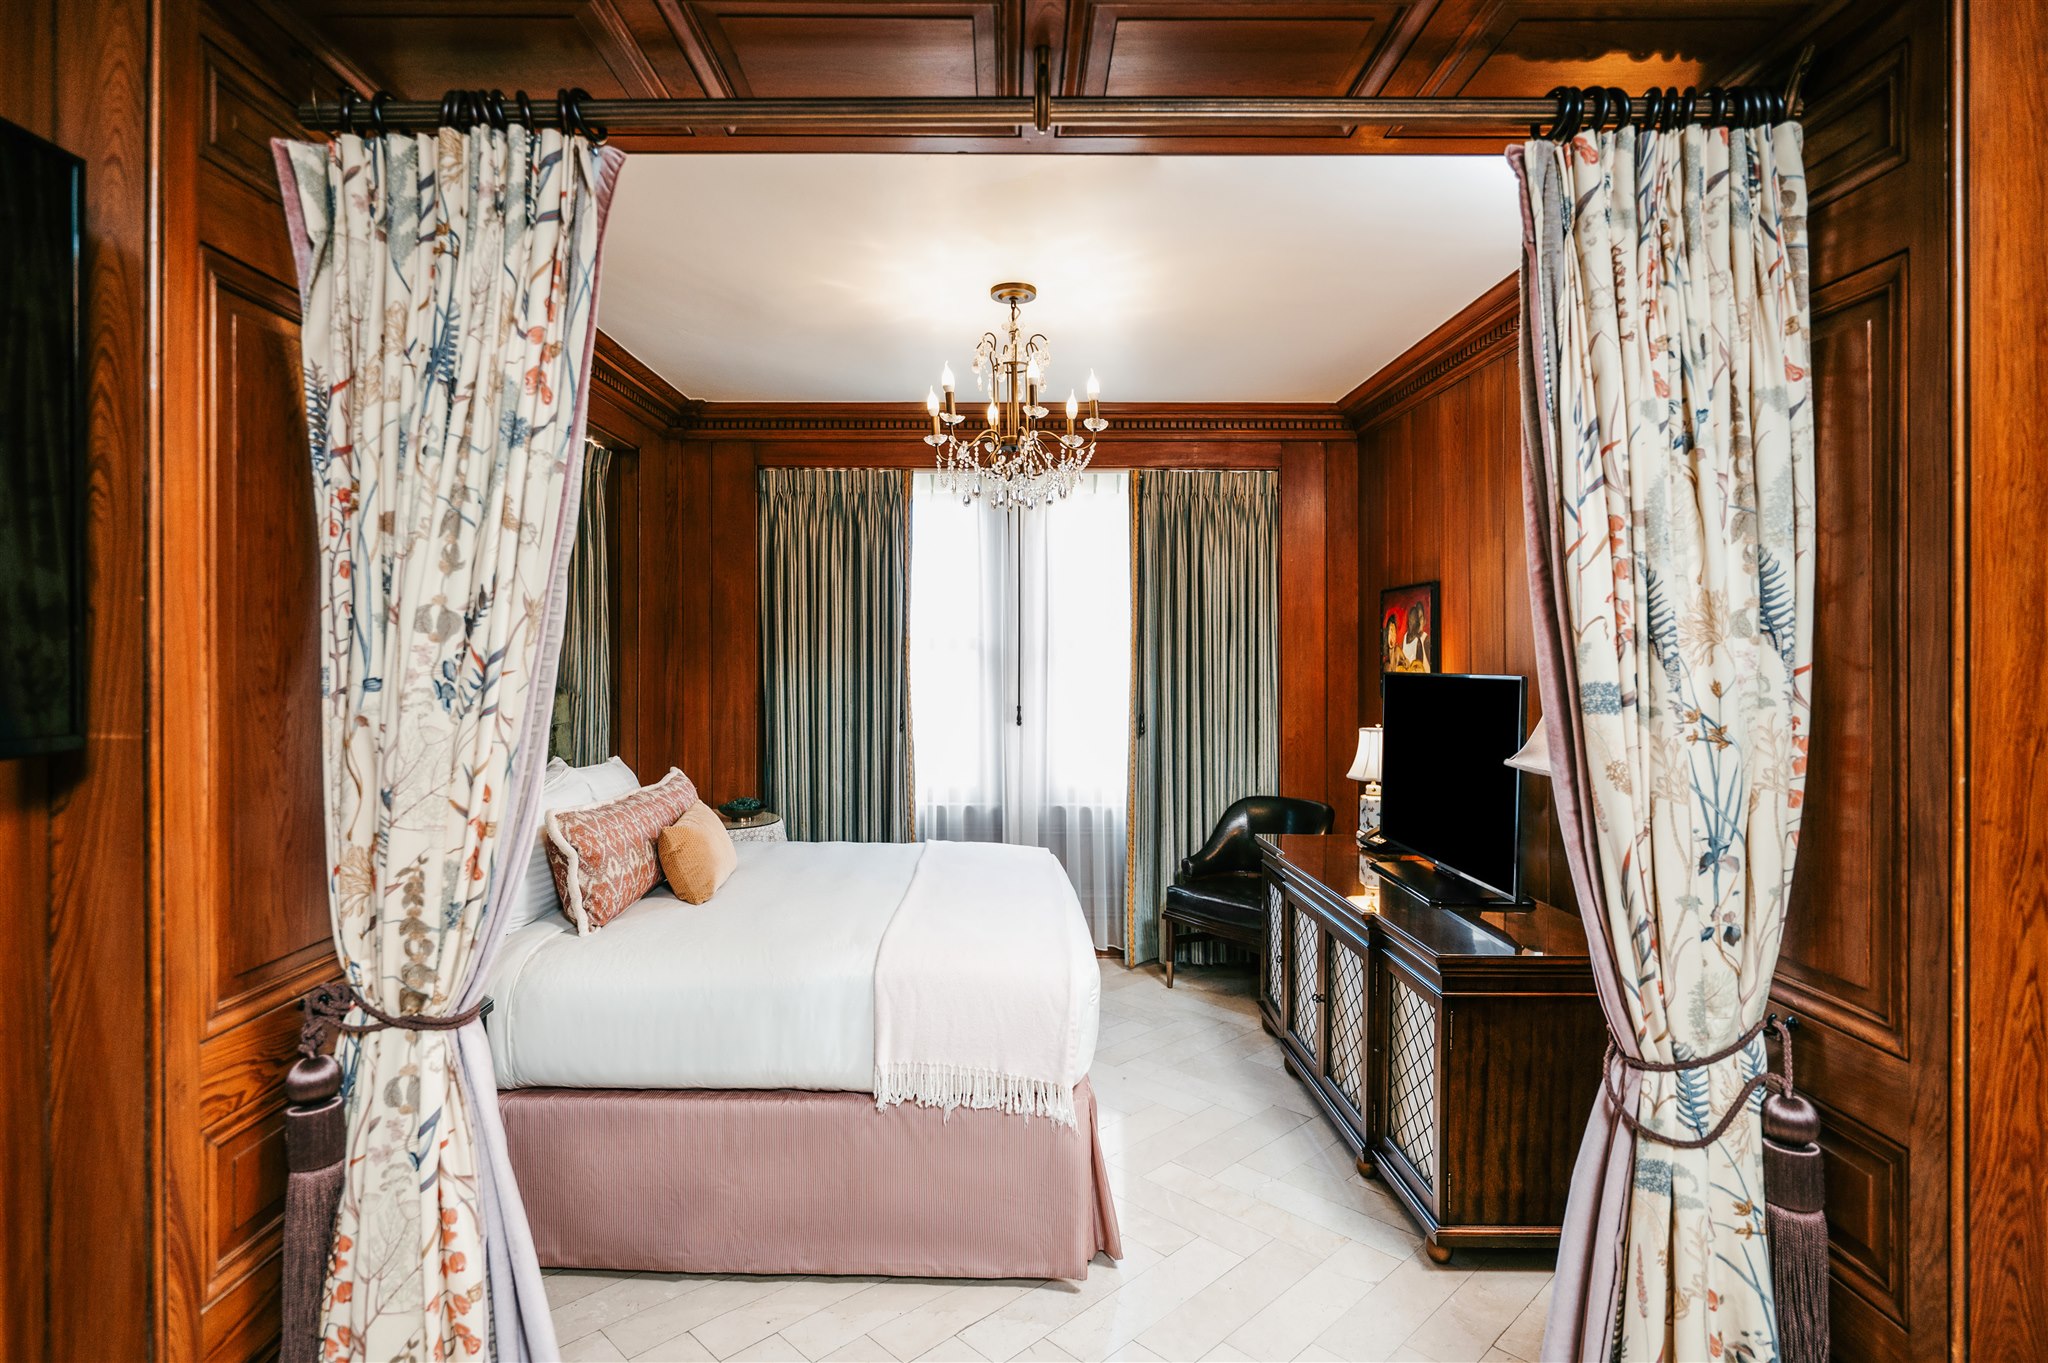 Pontchartrain Hotel guest room with wood panelling and patterned curtains